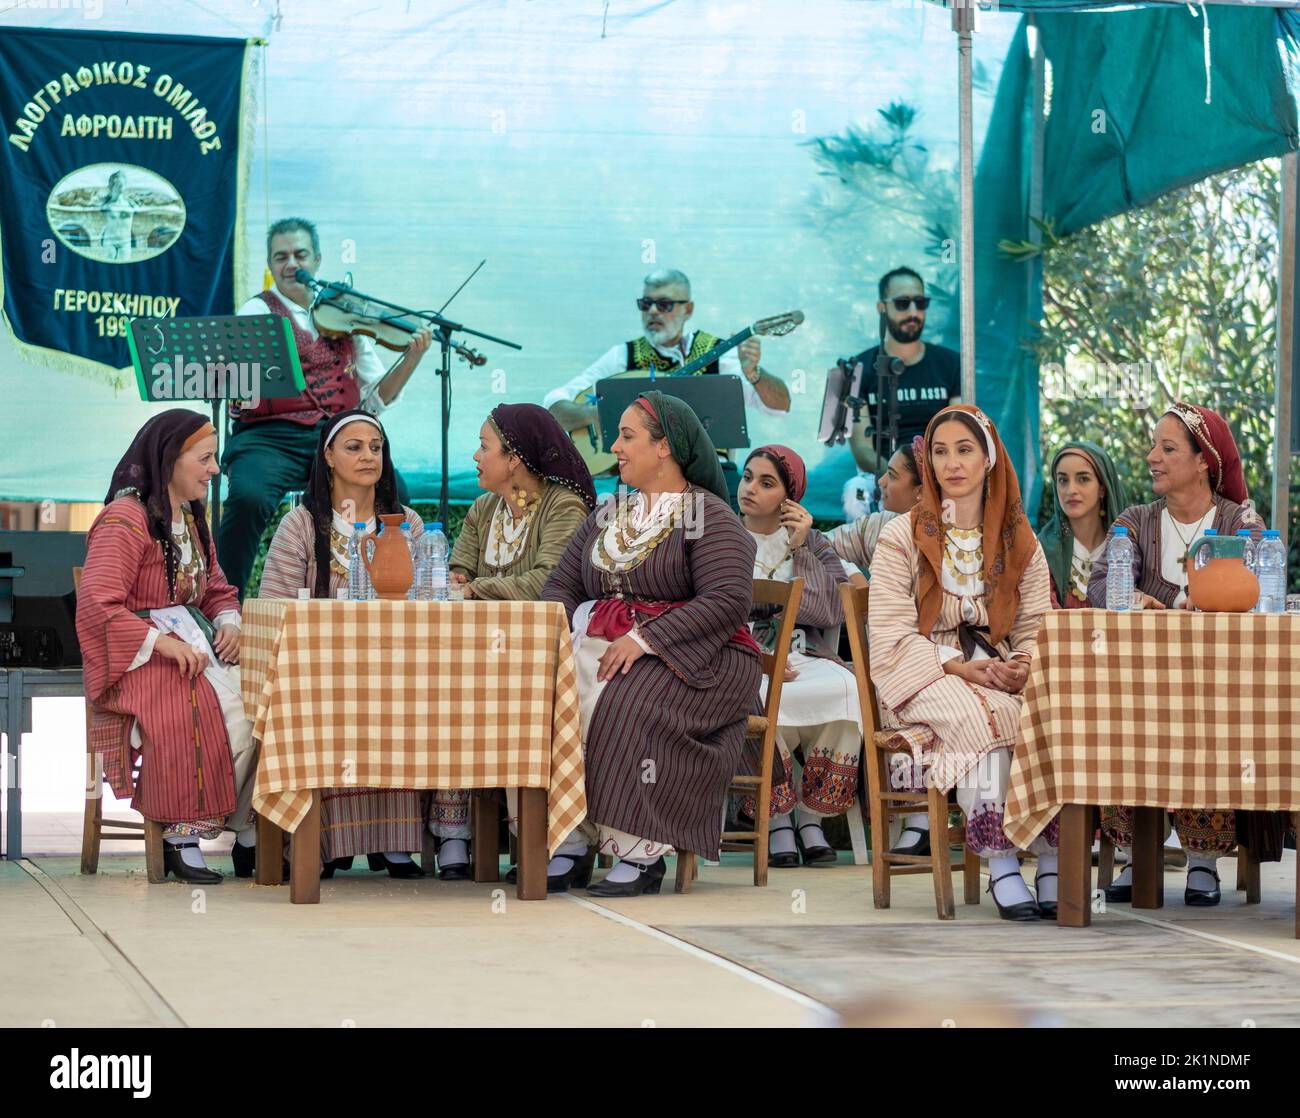 Cypriot people in traditional dress watch performers at the Statos-Agios Fotios Rural Festival, Paphos Region, Cyprus. Stock Photo